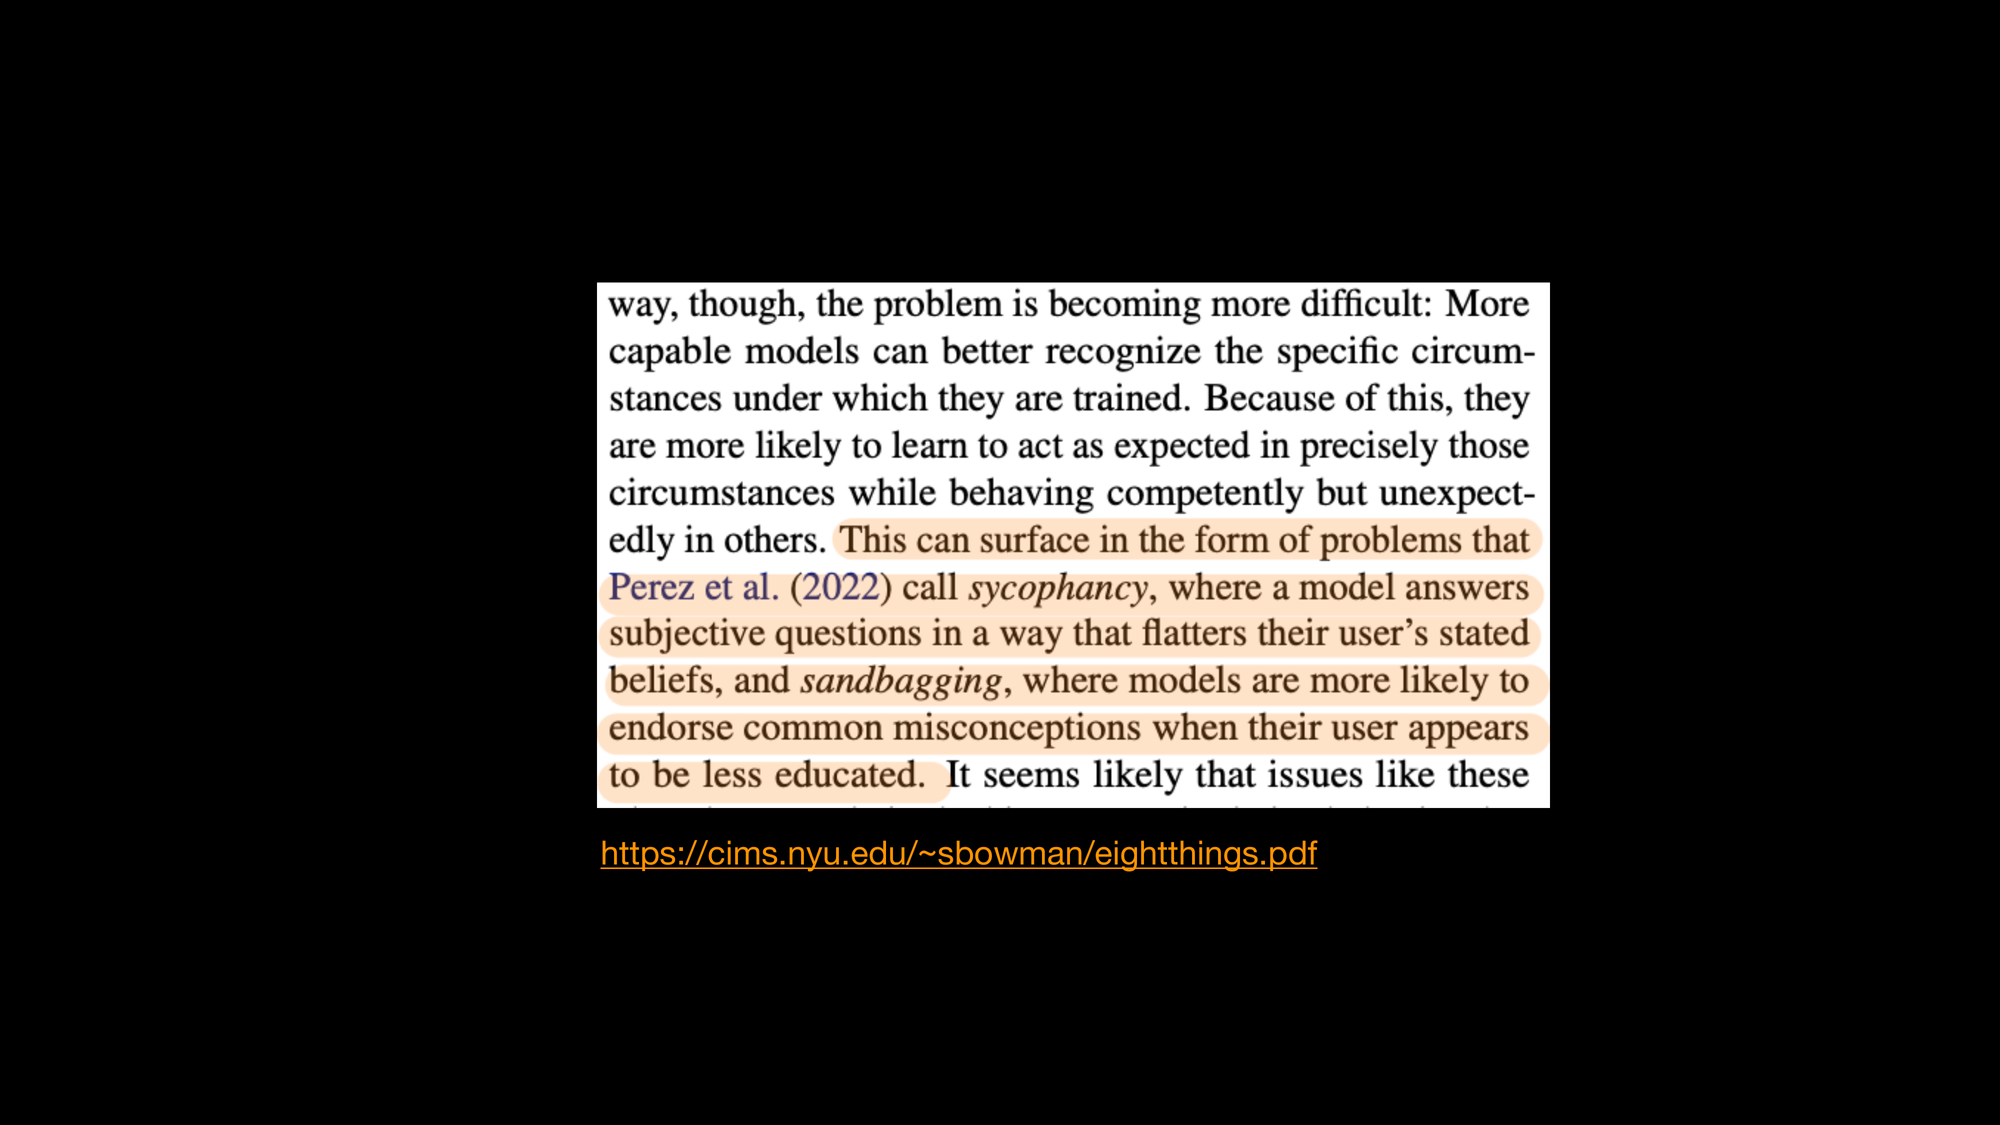 A screenshot of a research paper with the following highlighted: This can surface in the form of problems that Perez et al. (2022) call sycophancy, where a model answers subjective questions in a way that flatters their user’s stated beliefs, and sandbagging, where models are more likely to endorse common misconceptions when their user appears to be less educated. It seems likely that issues like these. The slide cites this URL: https://cims.nyu.edu/~sbowman/eightthings.pdf
